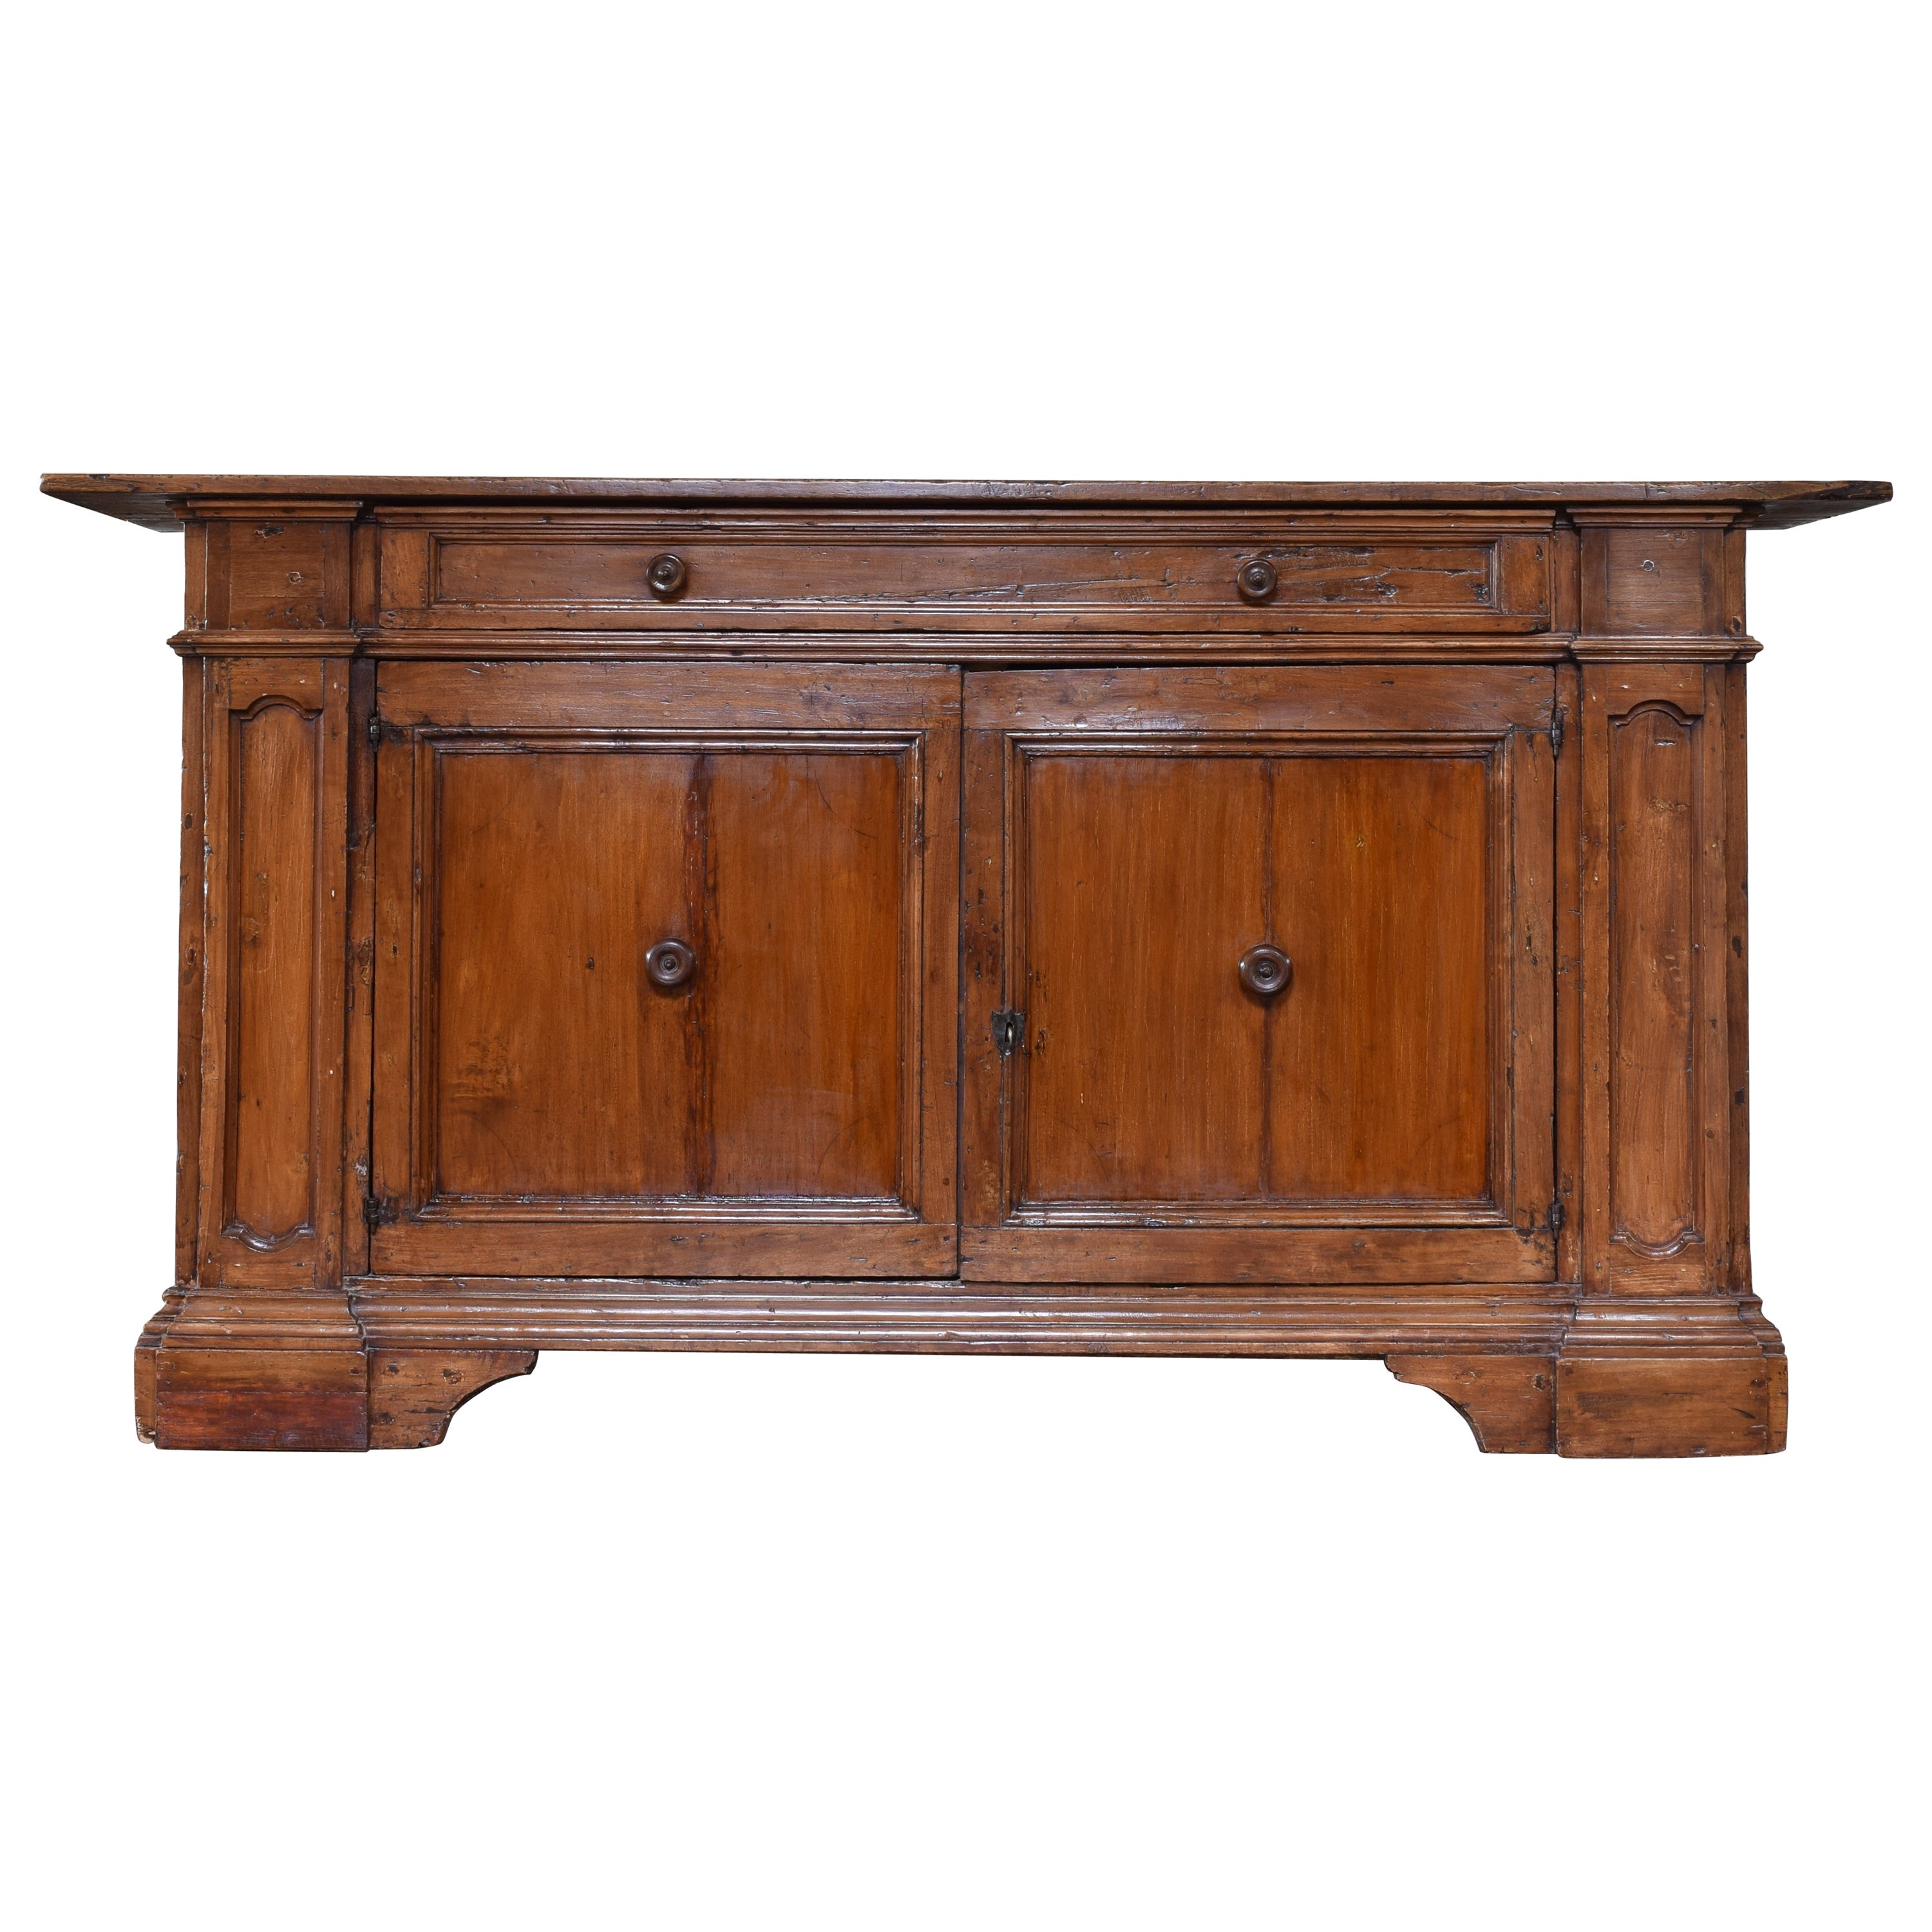 Italian Late Baroque Stained Fir-wood 1-Drawer, 2-Door Credenza, early 18th cen. For Sale